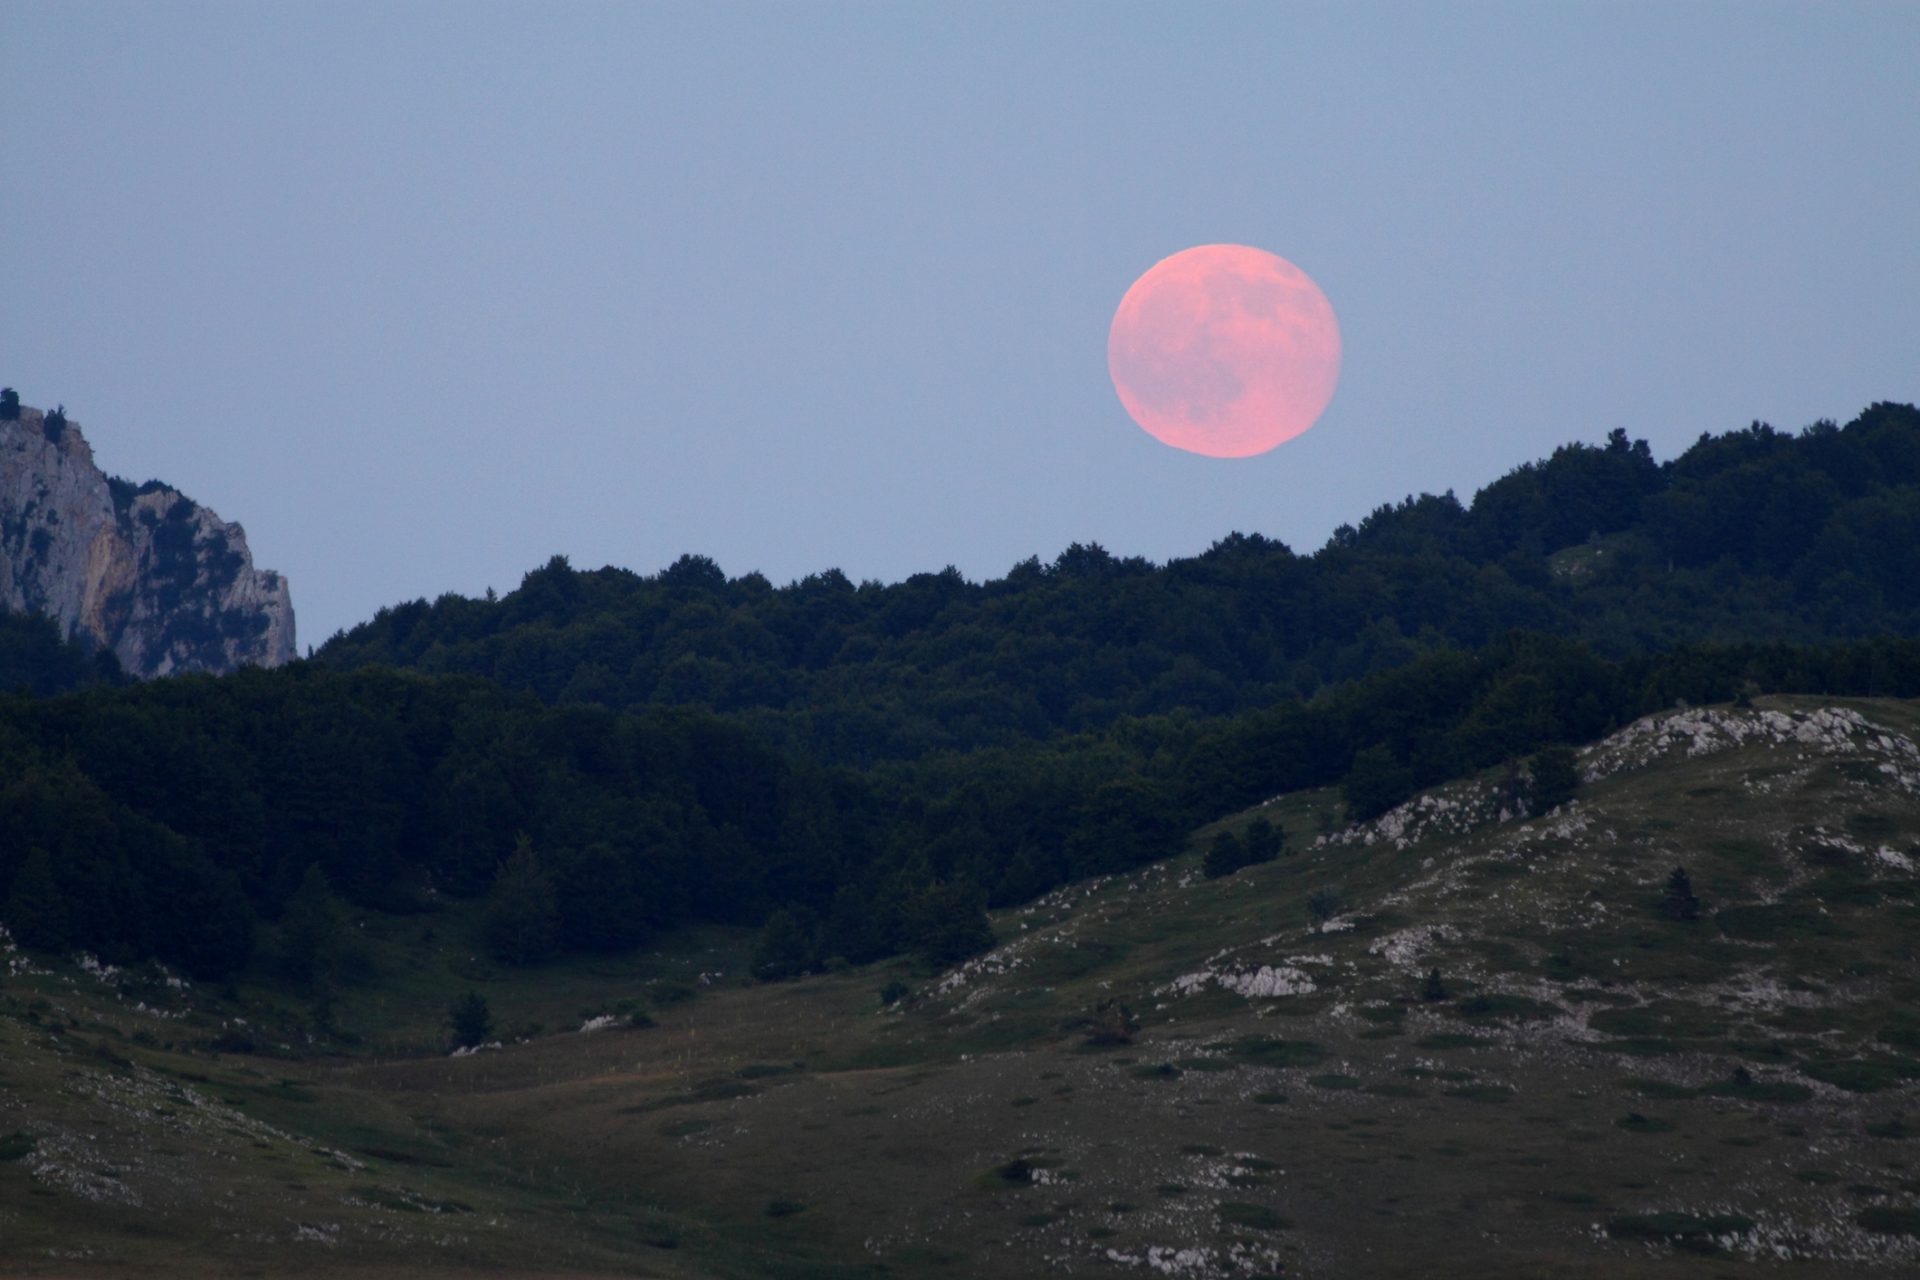 In some parts of Europe, it's known as the Mead Moon or Honey Moon